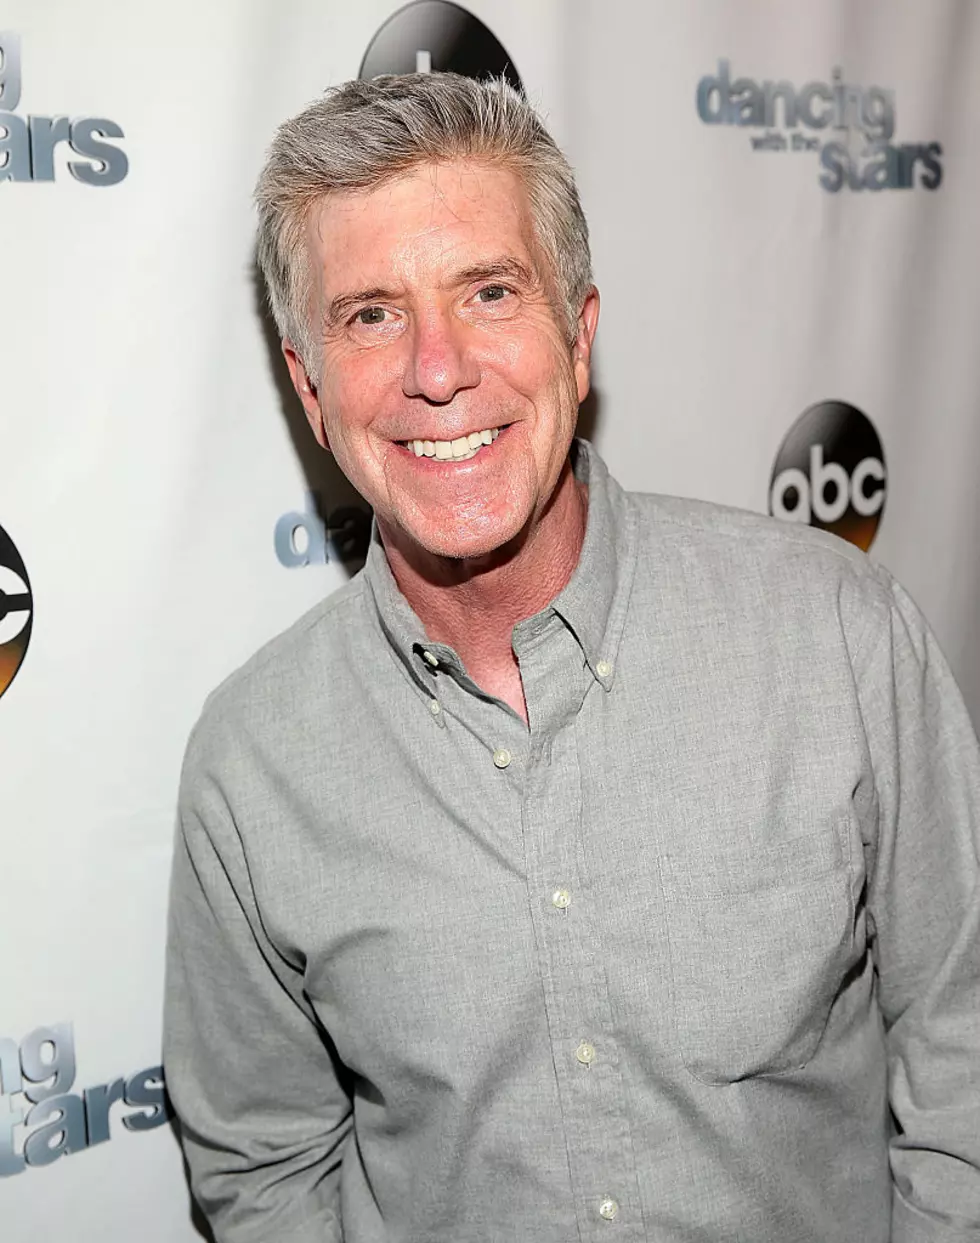 After 15 Years &#8216;Dancing With The Stars&#8217; Is Letting Tom Bergeron And Erin Andrews Go